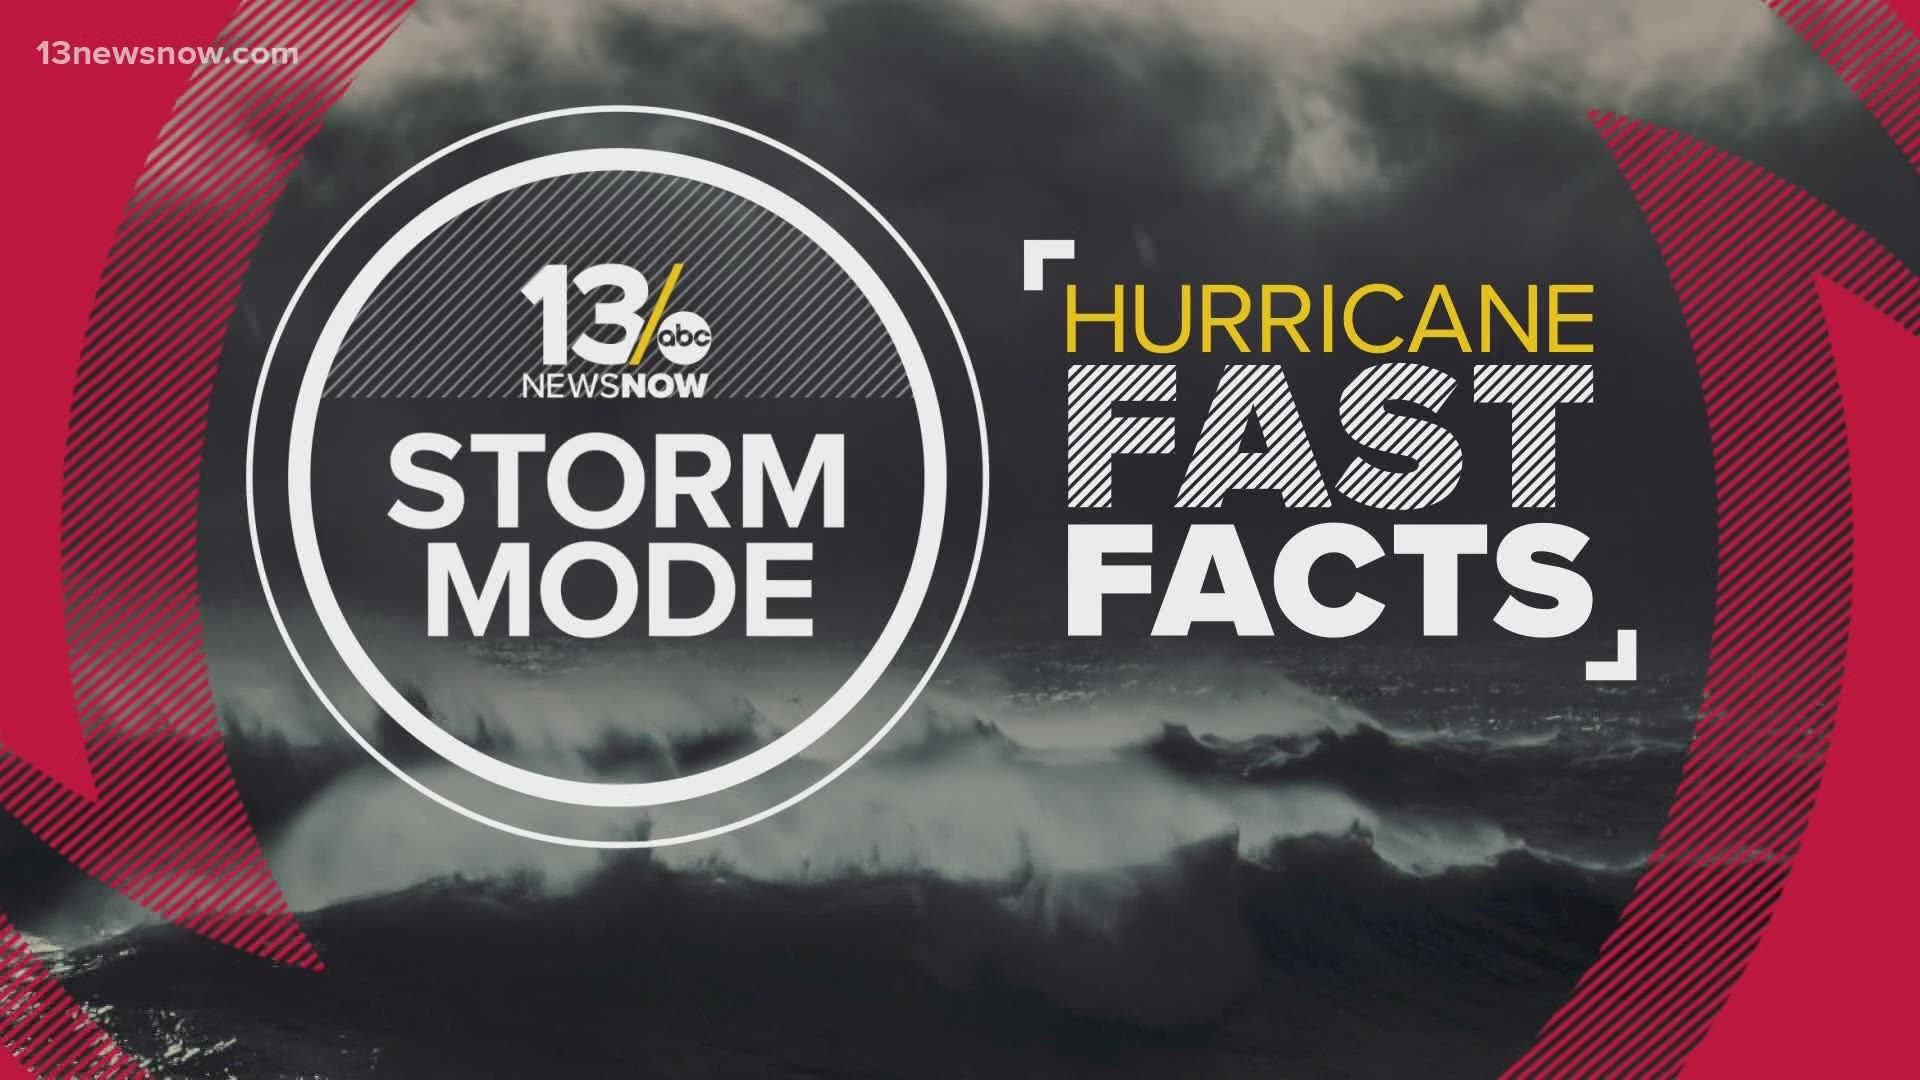 13News Now Hurricane Facts: What is the dirty side of a hurricane?